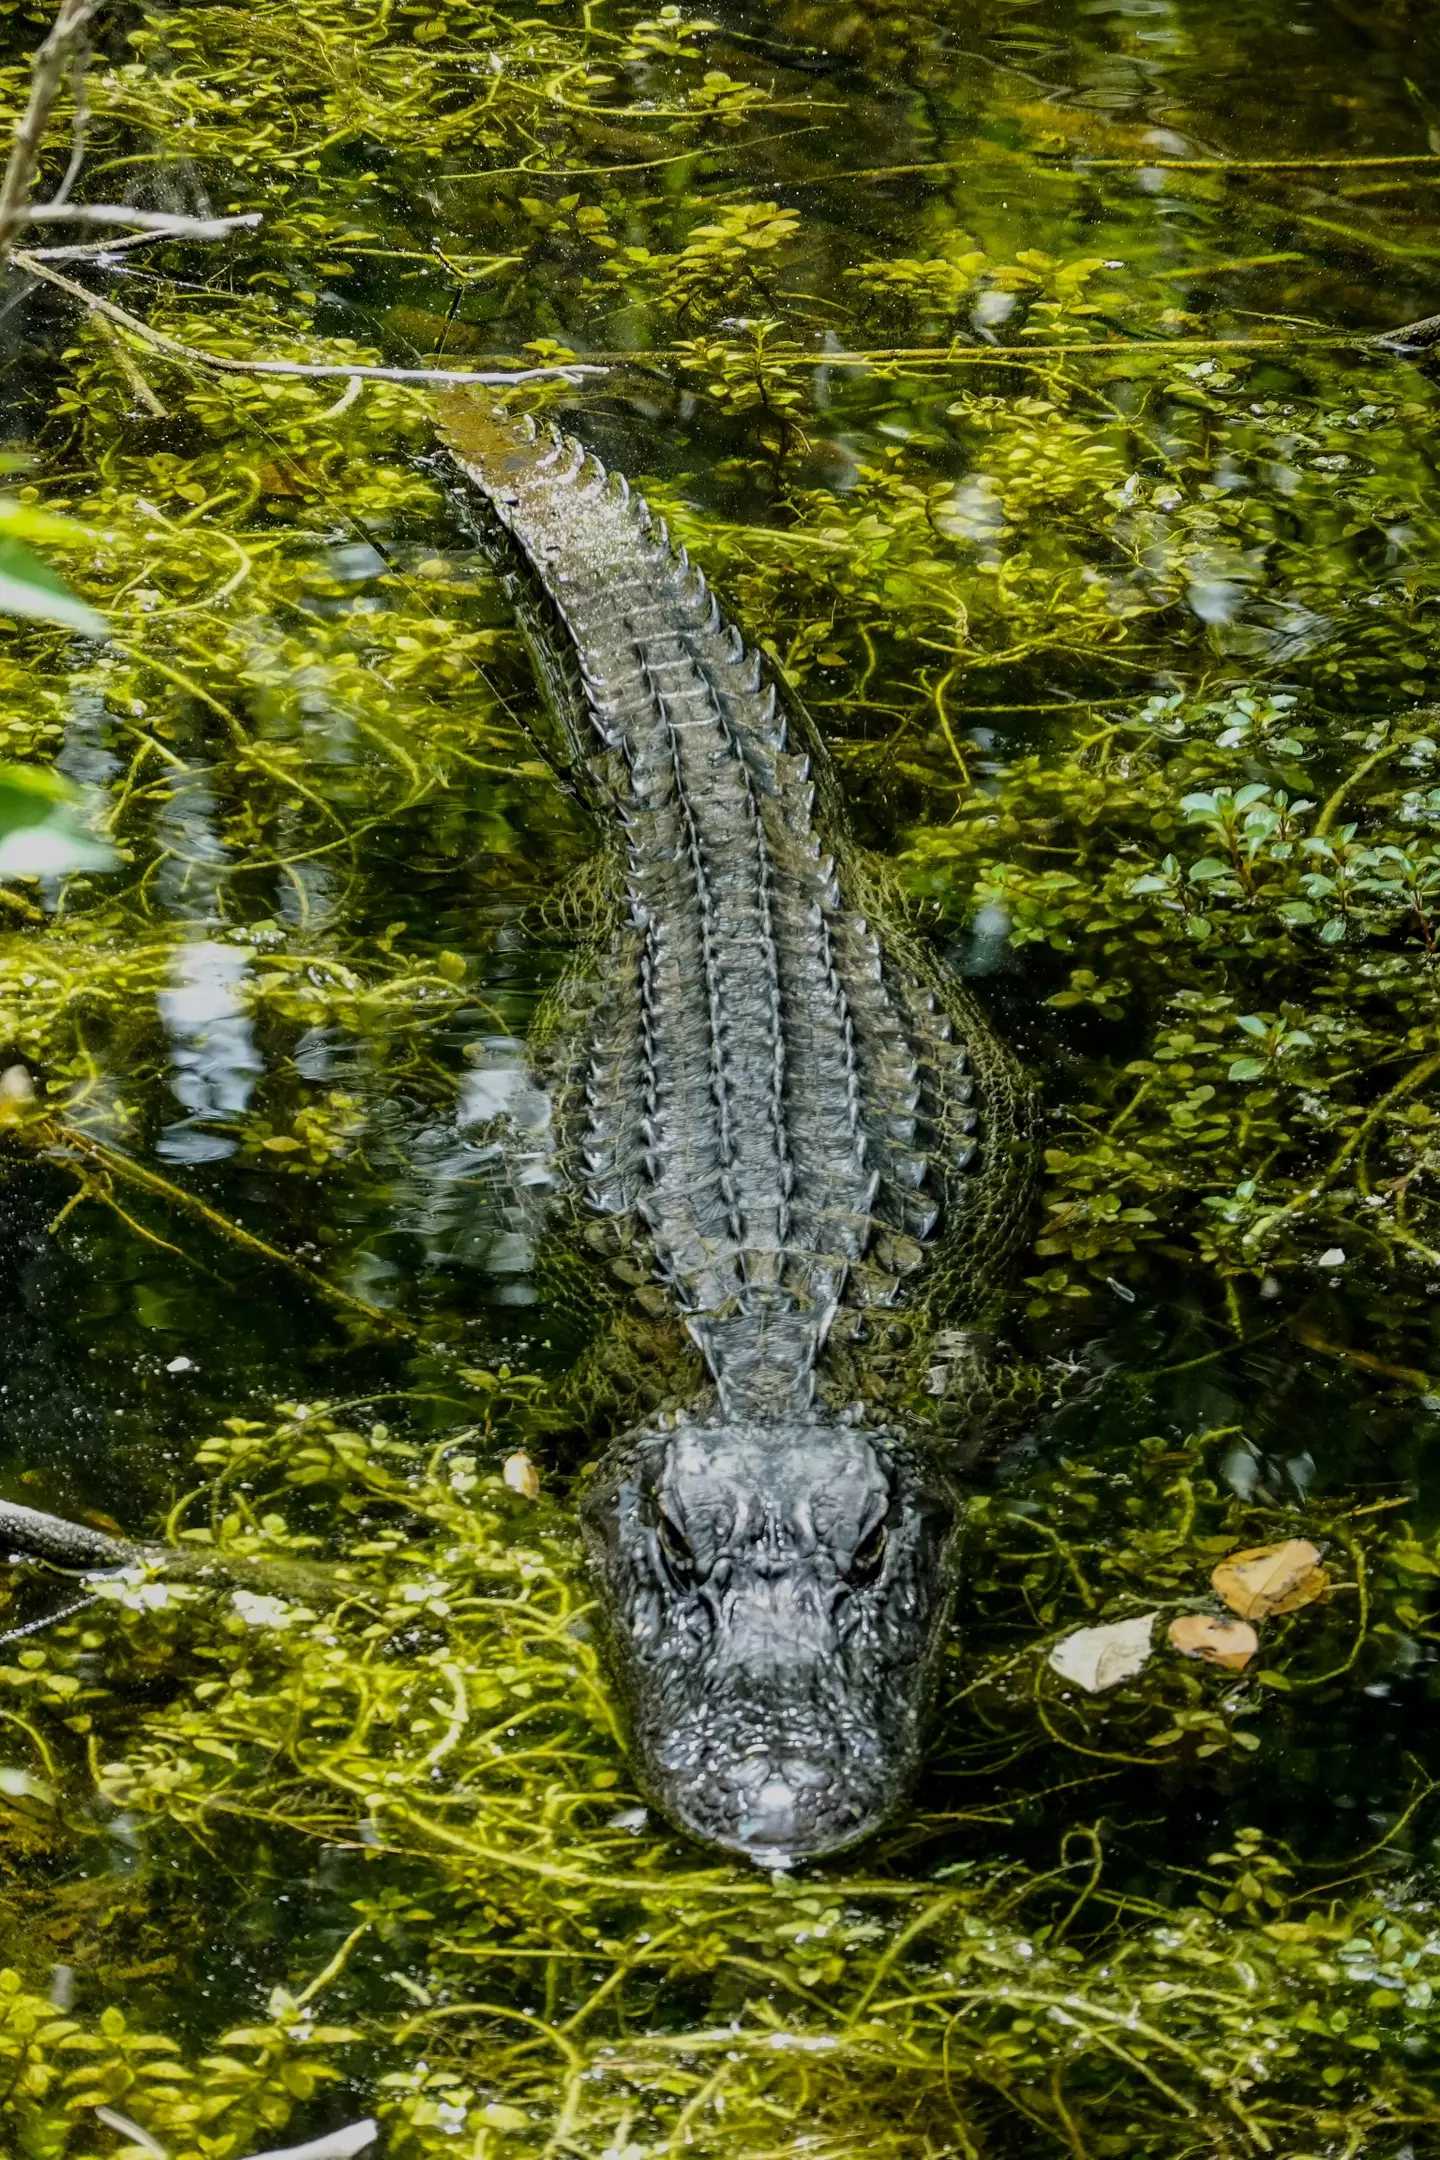 An alligator moving in a shallow body of water. (pexels/Henning Roettger)